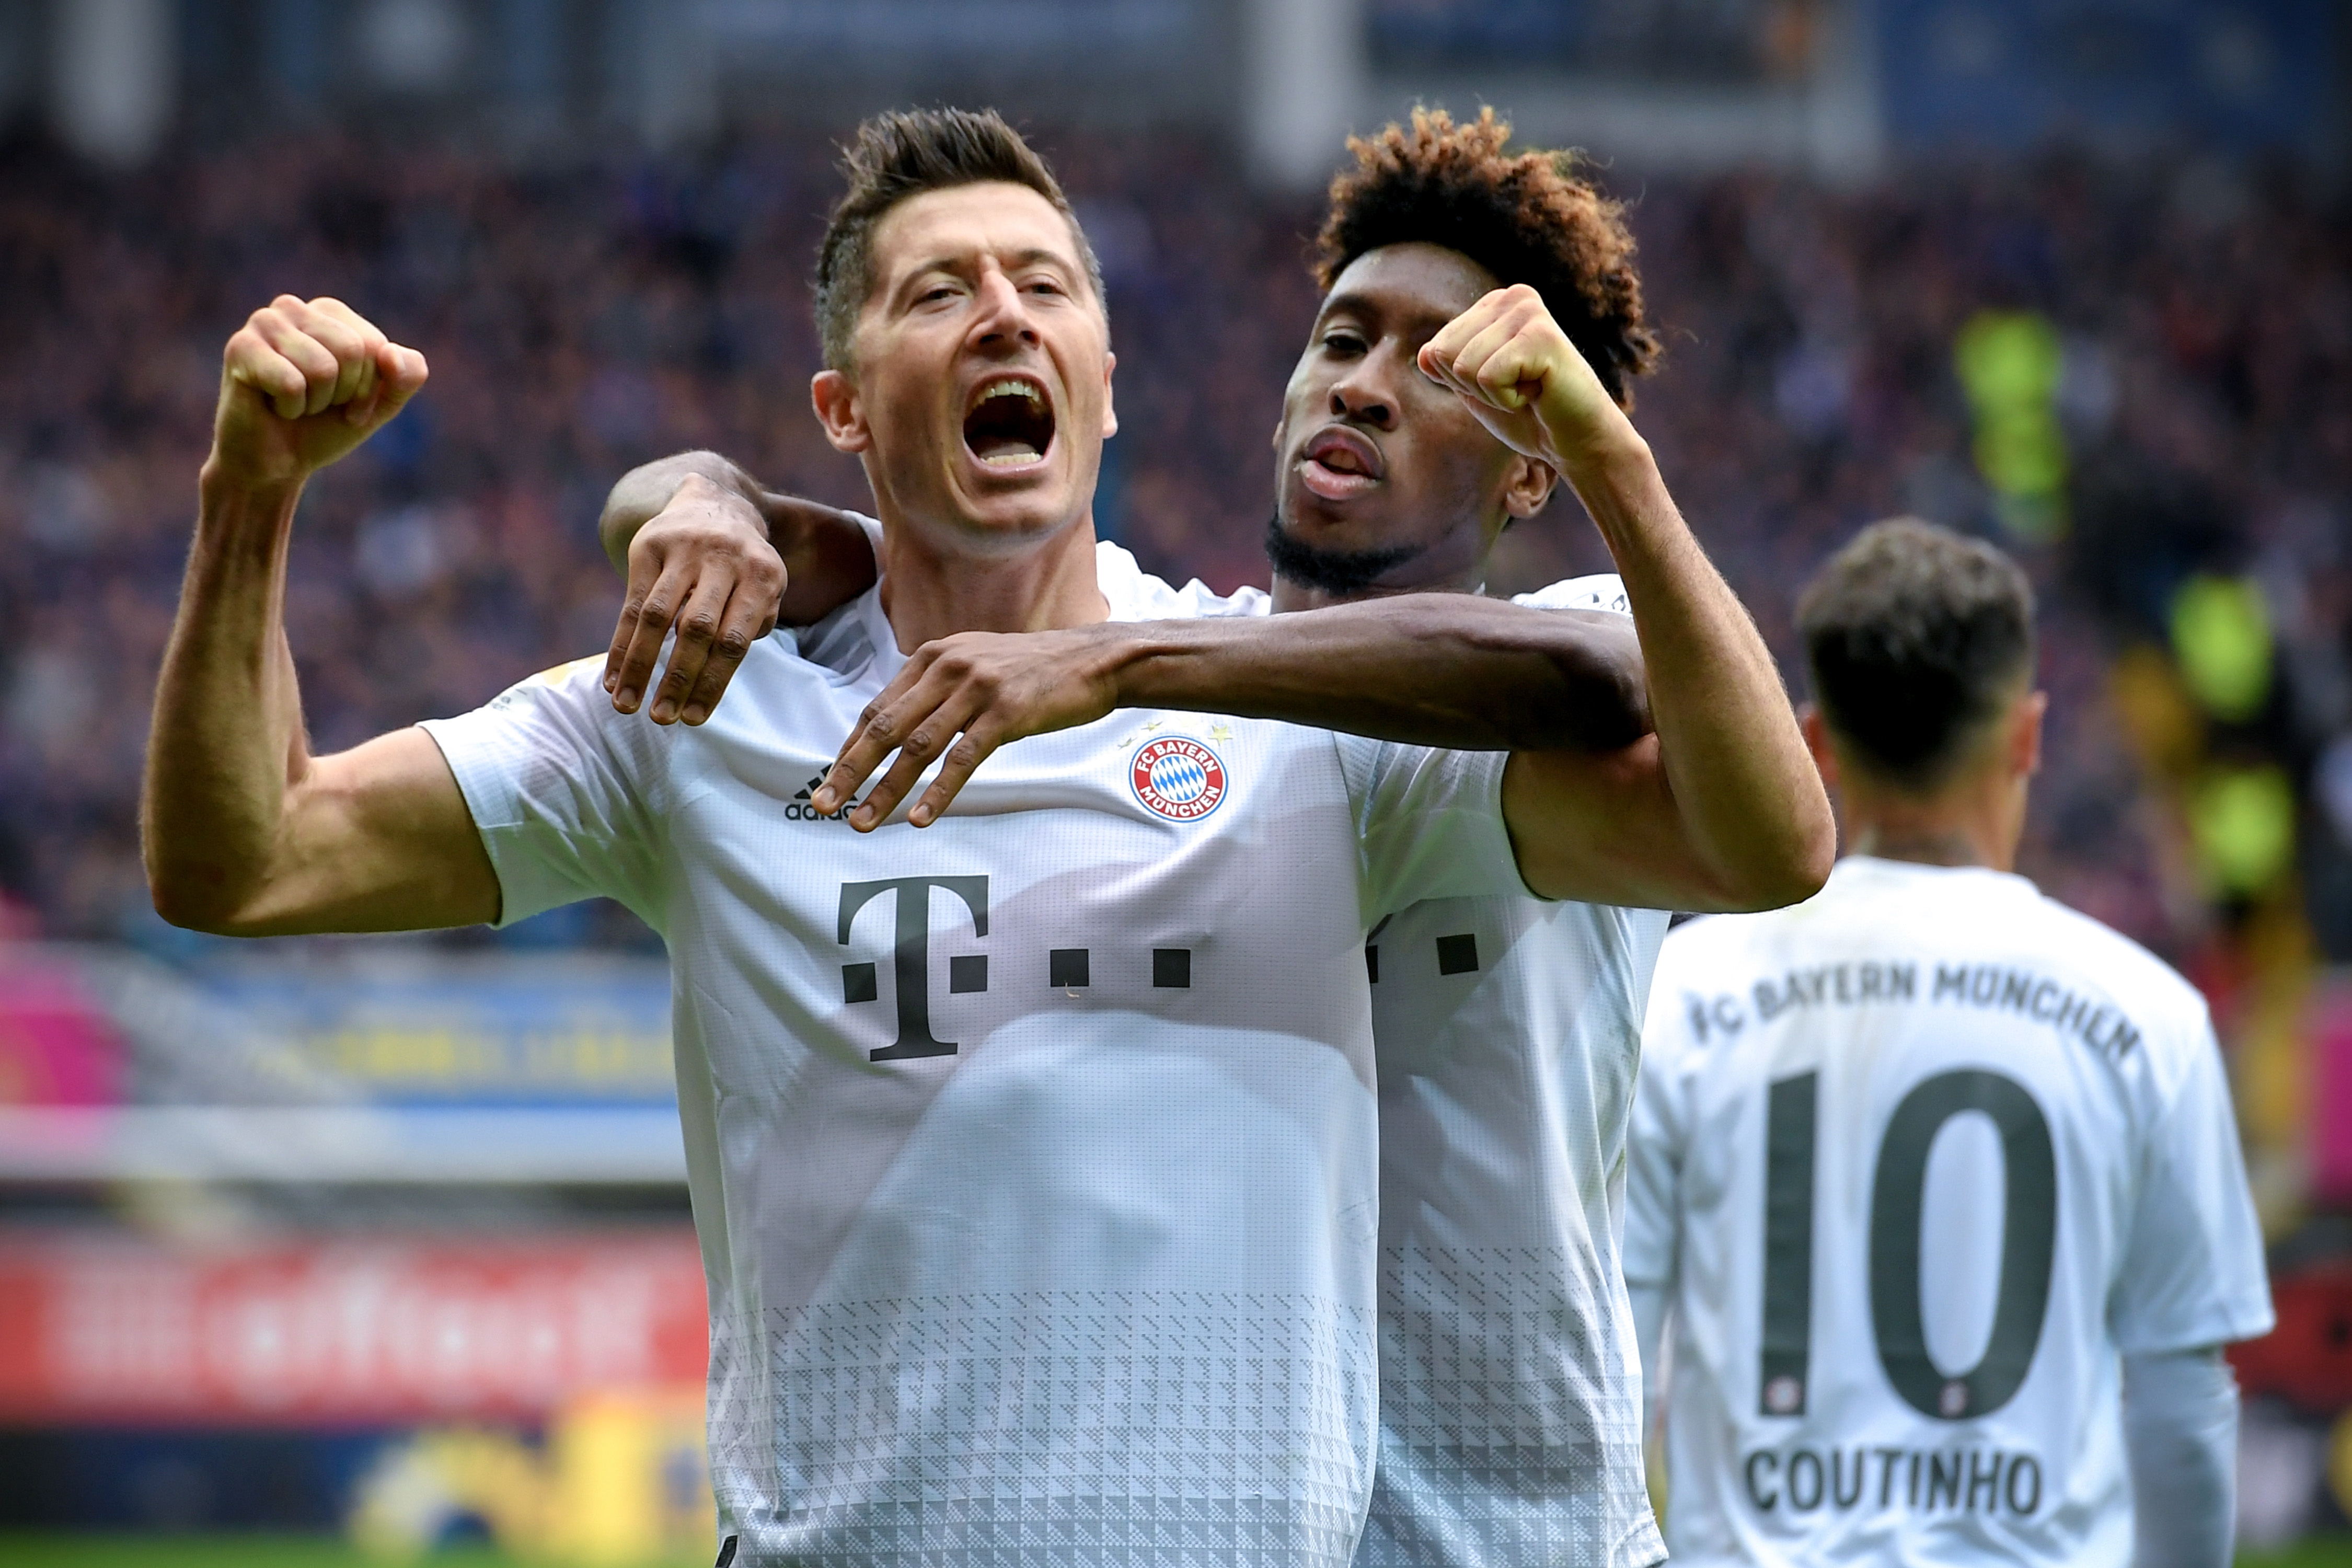 epa07876928 Bayern's Robert Lewandowski (L) celebrates with his teammates after scoring the 3-1 lead during the German Bundesliga soccer match between SC Paderborn and FC Bayern Muenchen in Paderborn, Germany, 28 September 2019.  EPA/SASCHA STEINBACH CONDITIONS - ATTENTION: The DFL regulations prohibit any use of photographs as image sequences and/or quasi-video.